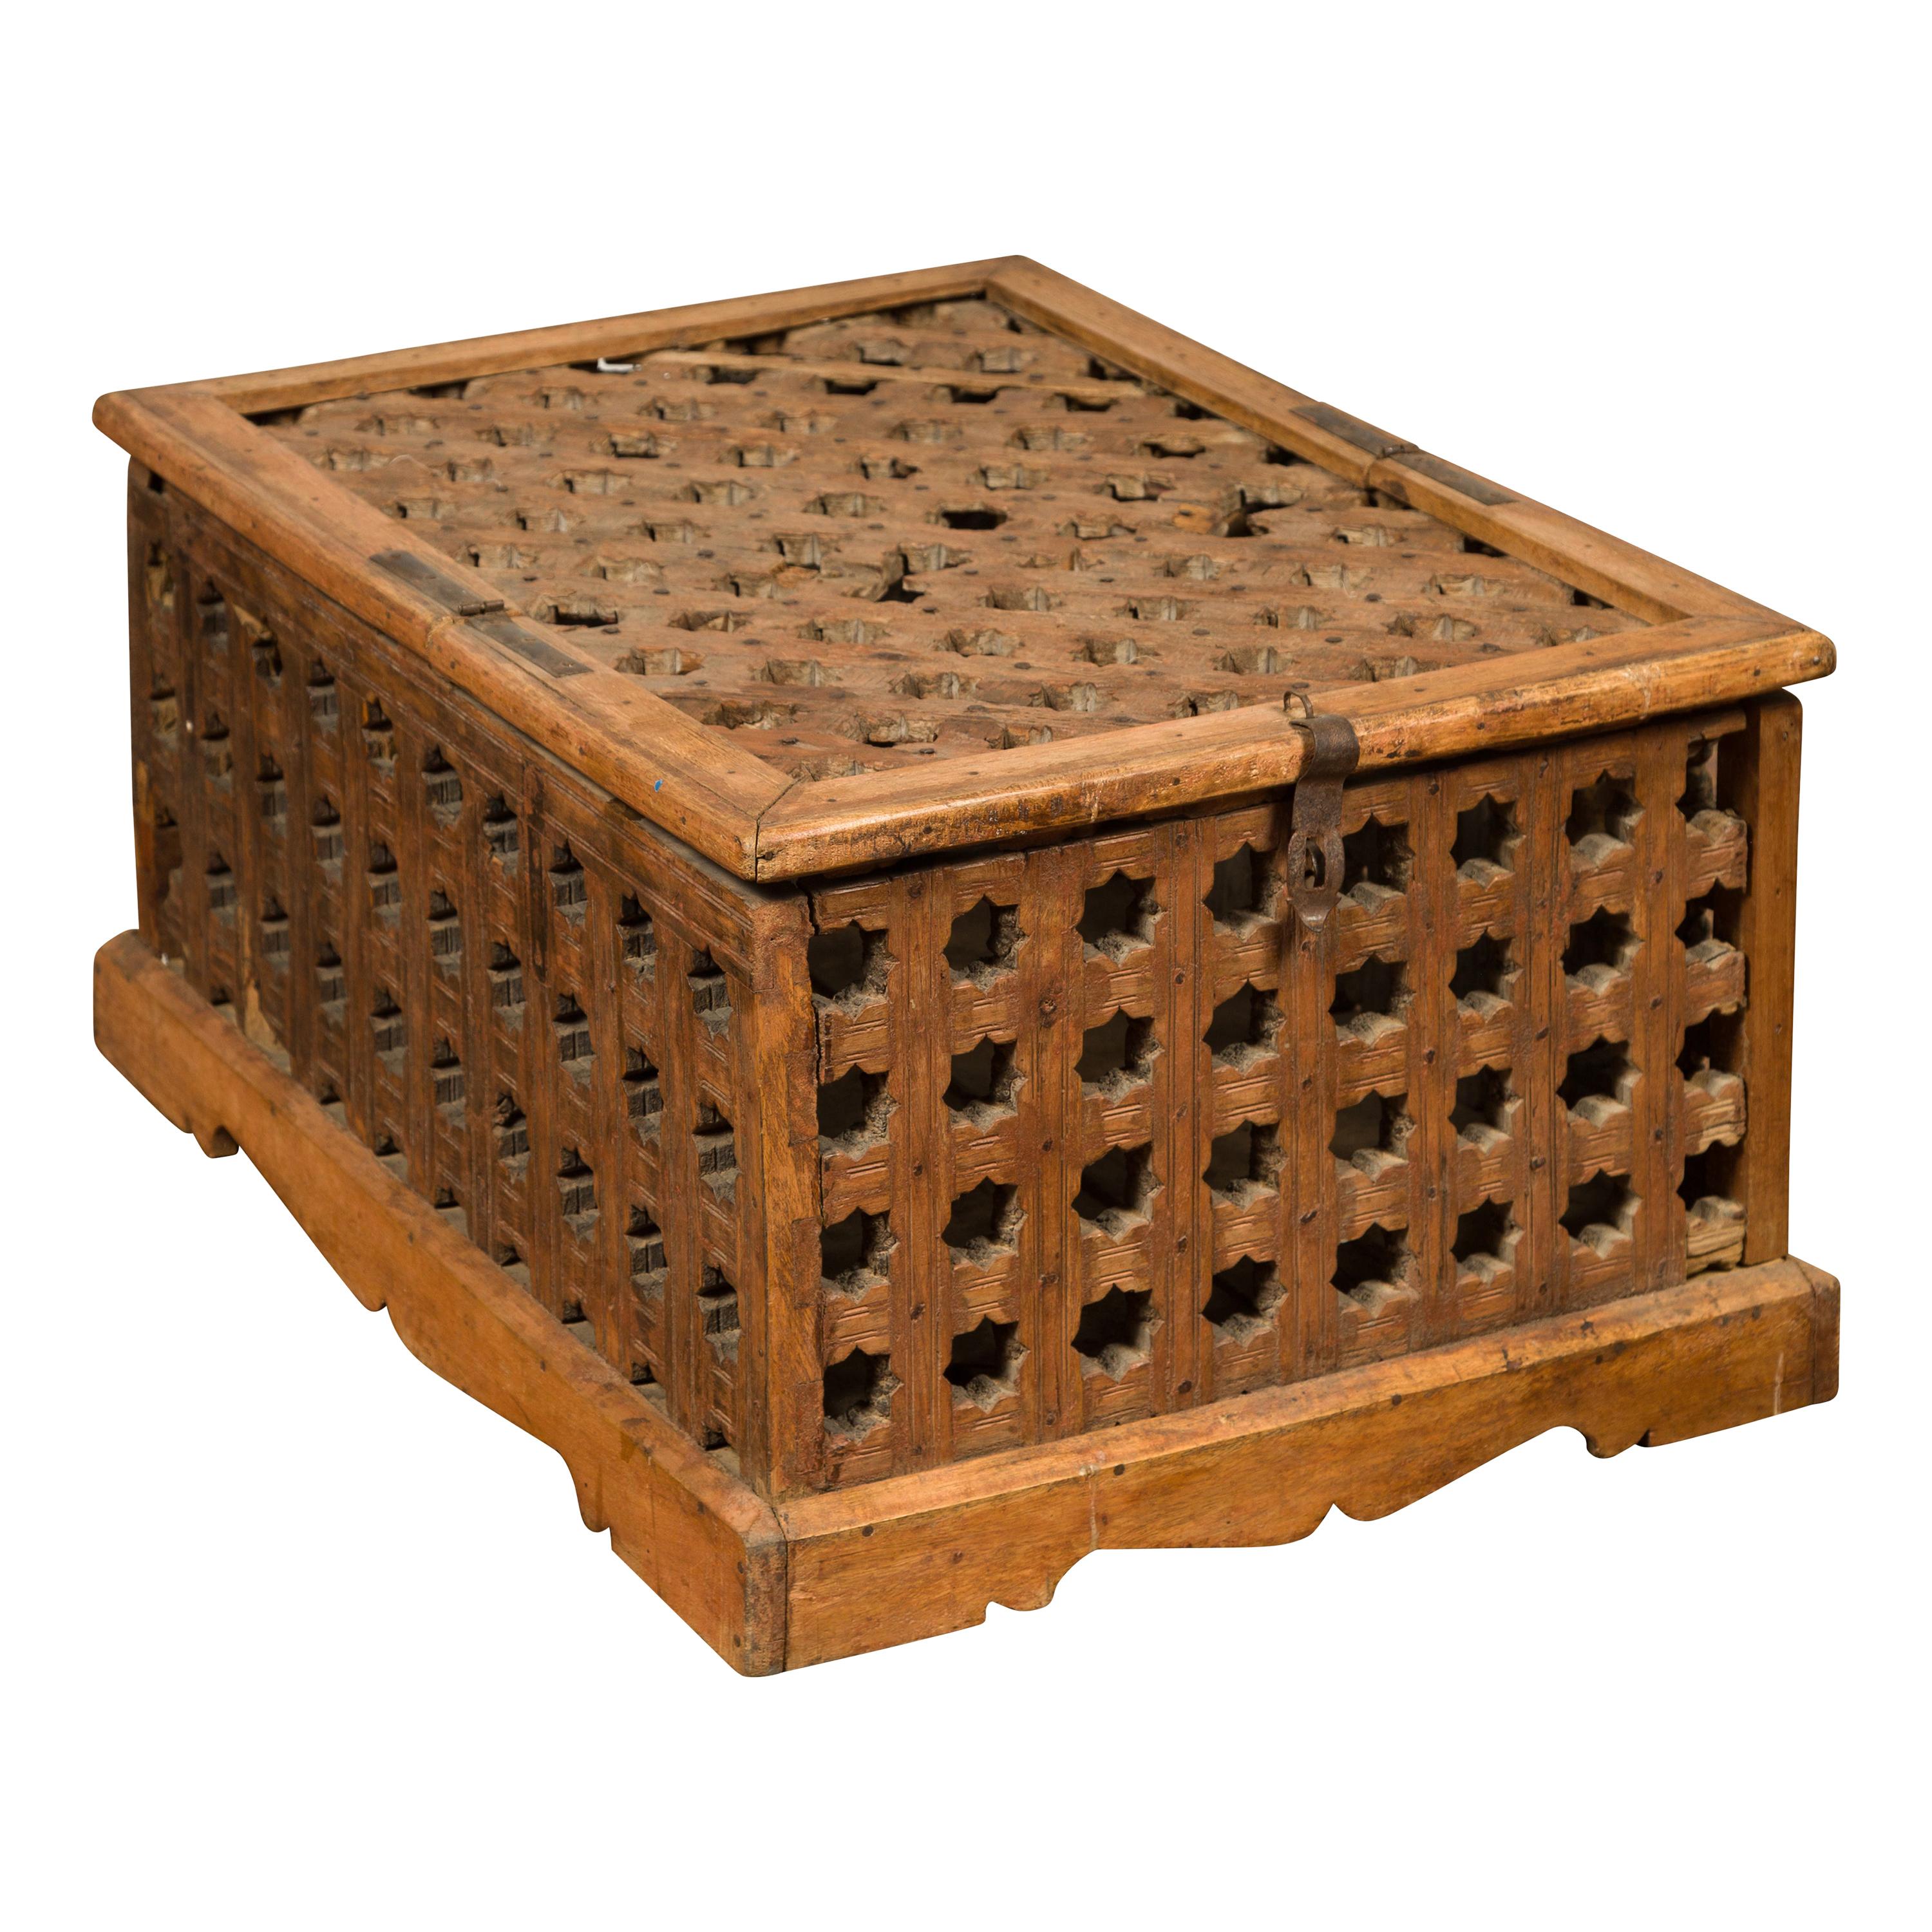 Rustic Indian Antique Food Box with Pierced Star Motifs and Bracketed Plinth For Sale